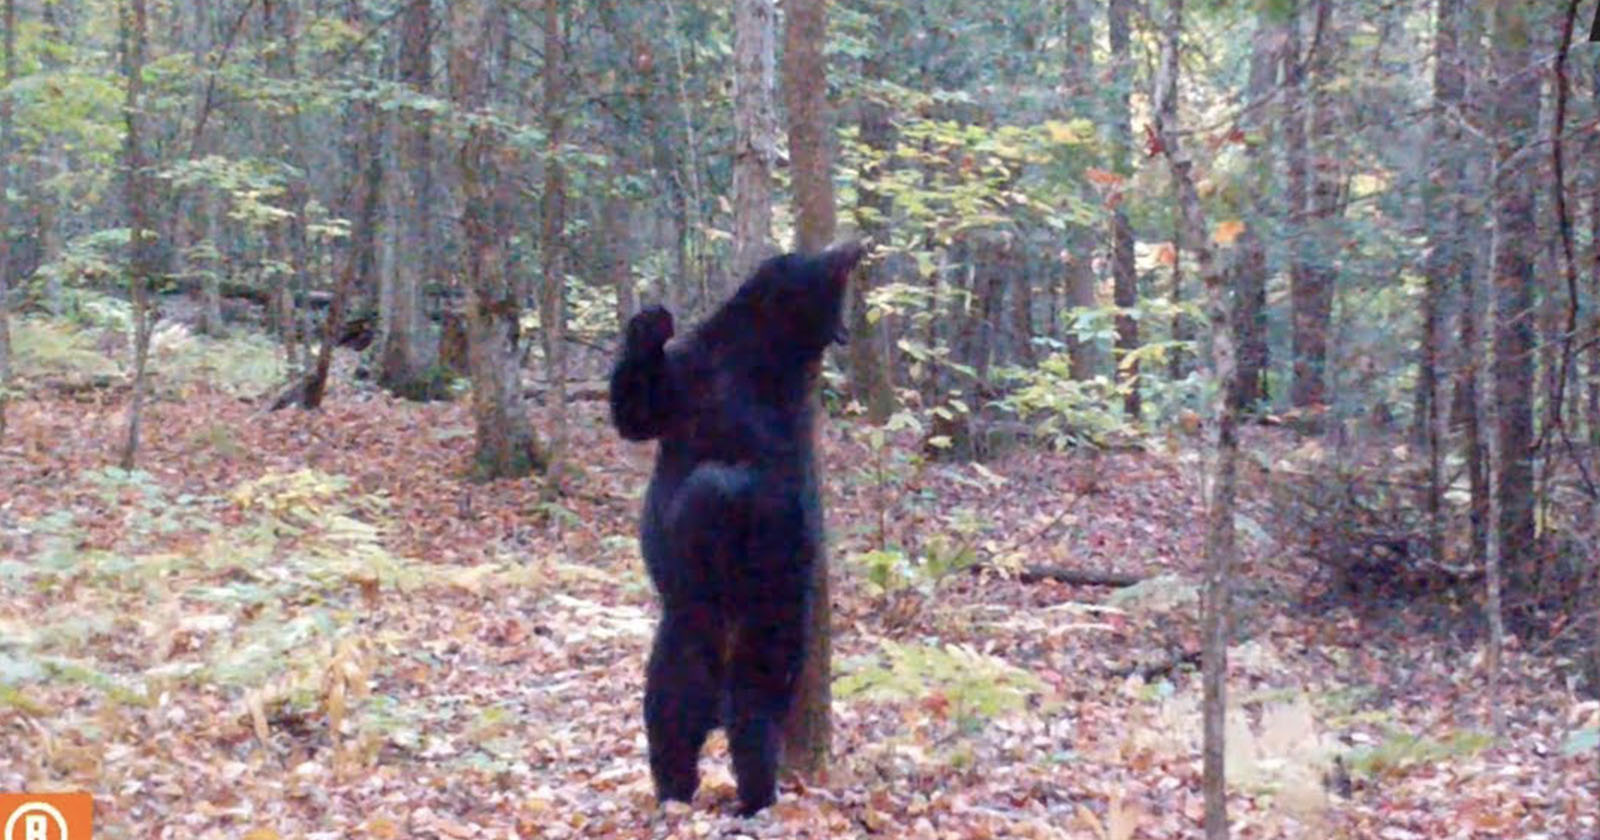 Sexy Black Bear Puts on a Show for Trail Camera While Scratching its Back